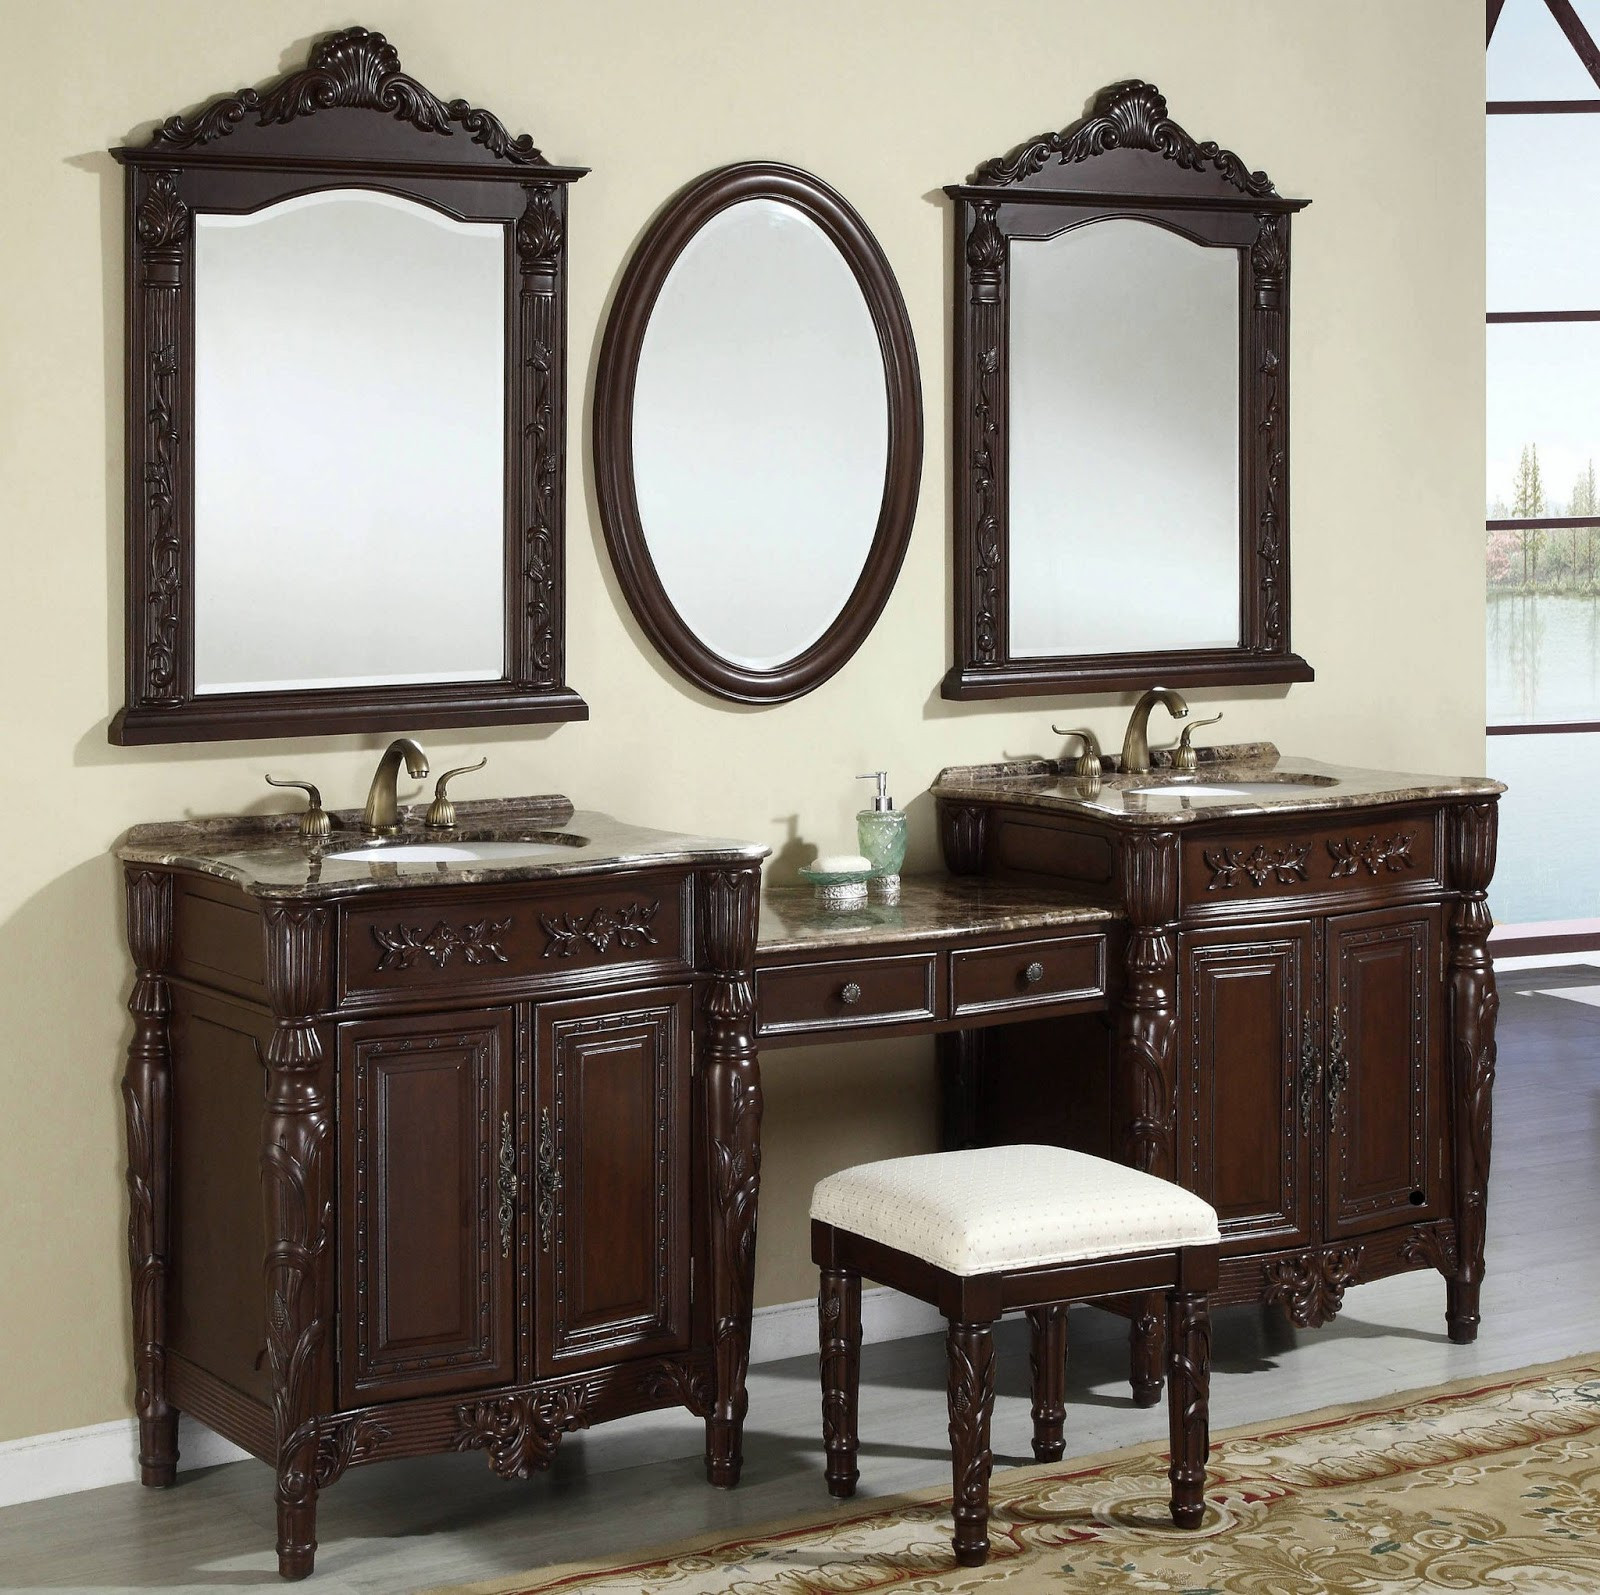 Bathroom Cabinet Mirrors
 Bathroom Vanity Mirrors Models and Buying Tips Cabinets